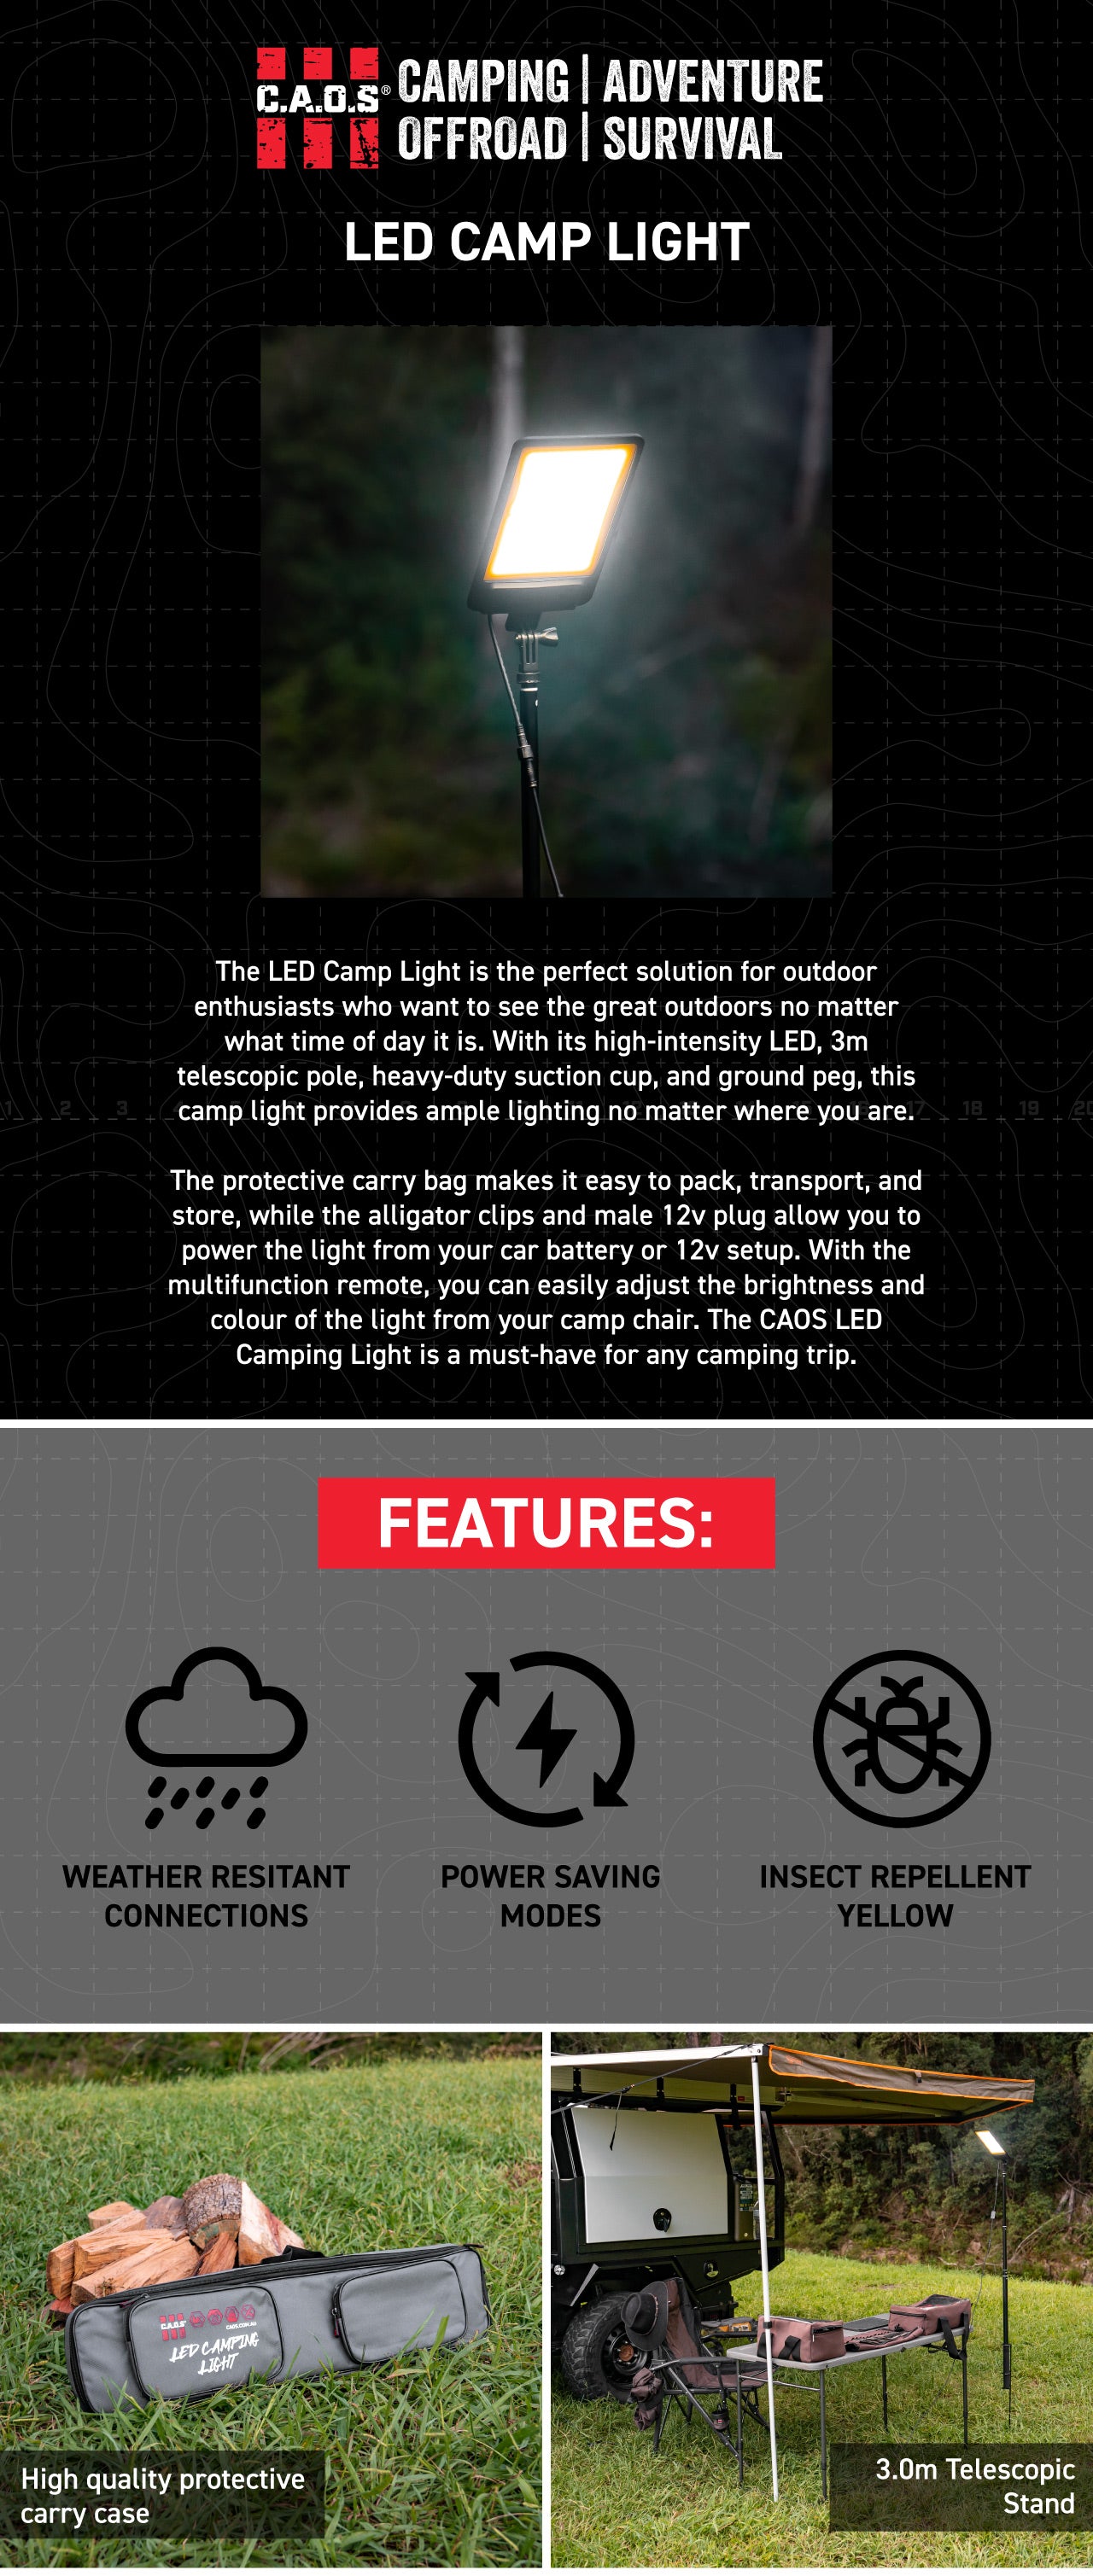 The LED Camp Light is the perfect solution for outdoor enthusiasts who want to SEE the great outdoors no matter what time of day it is. With its high-intensity LED, 3m telescopic pole, heavy-duty suction cup, and ground peg, this camp light provides ample lighting no matter where you are.   The protective carry bag makes it easy to pack, transport, and store, while the alligator clips and male 12v plug allow you to power the light from your car battery or 12v setup. With the multifunction remote, you can ea